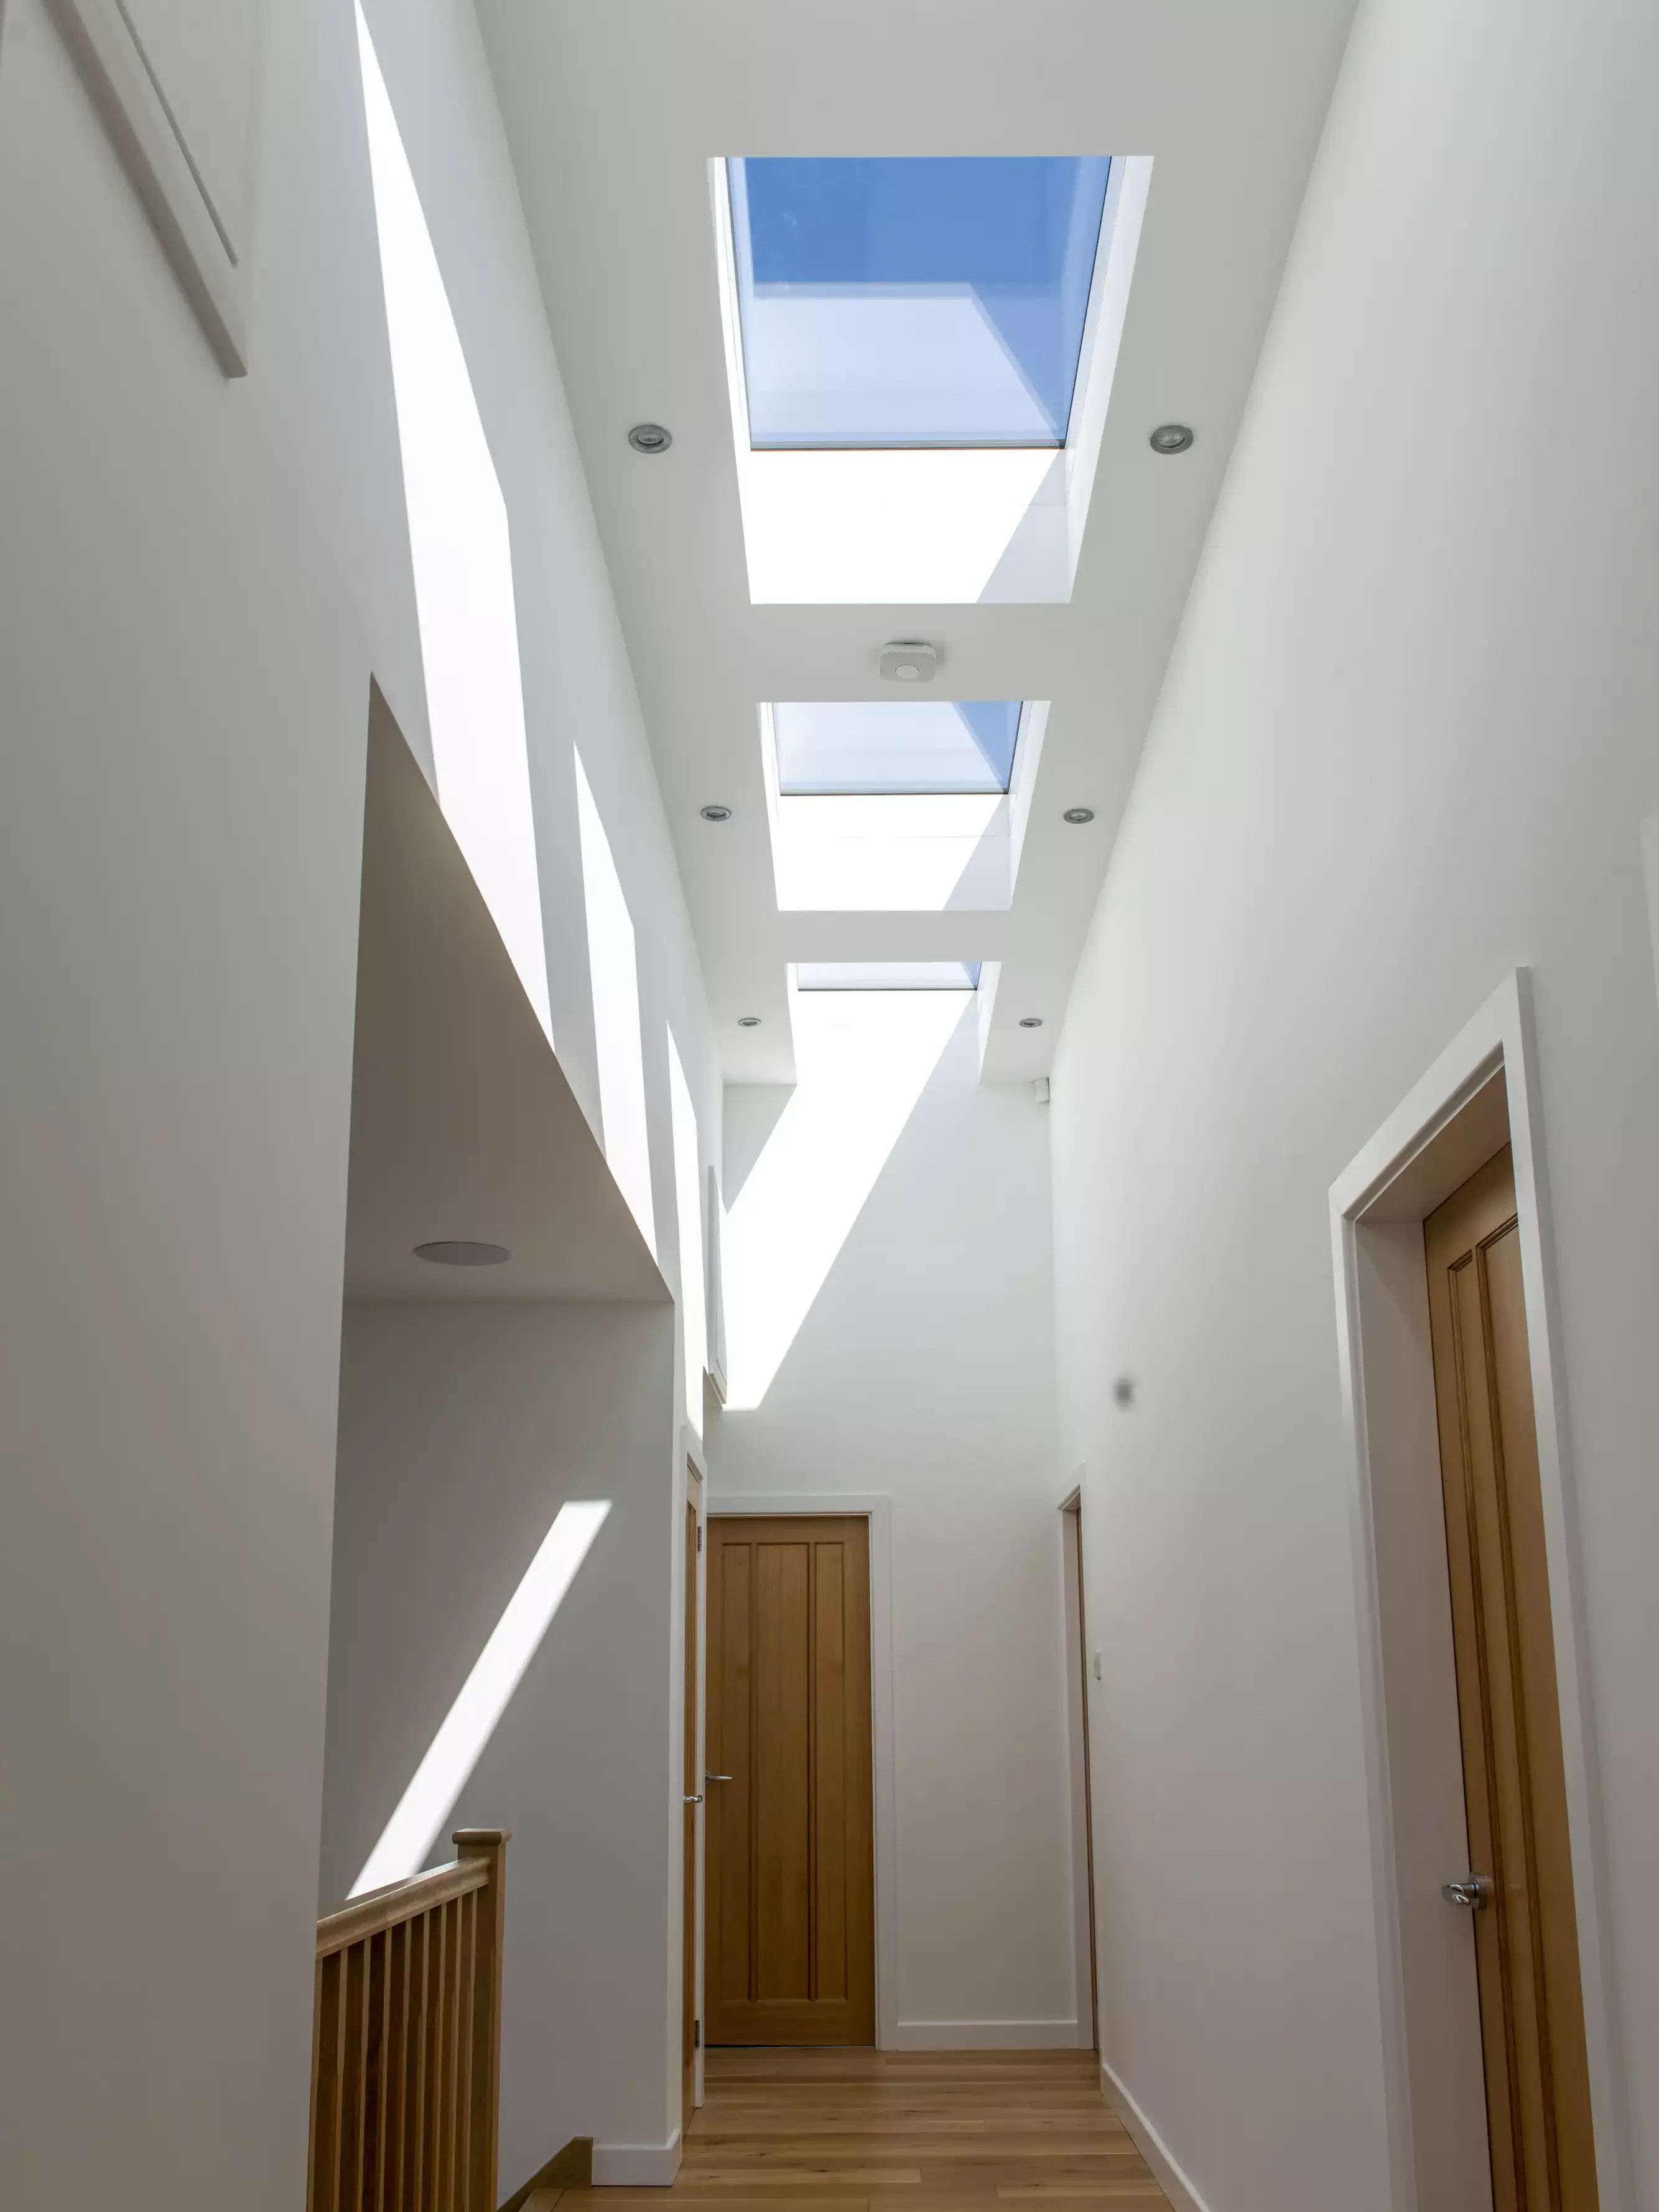 Modern corridor with wooden floors lit by natural light from VELUX roof windows.